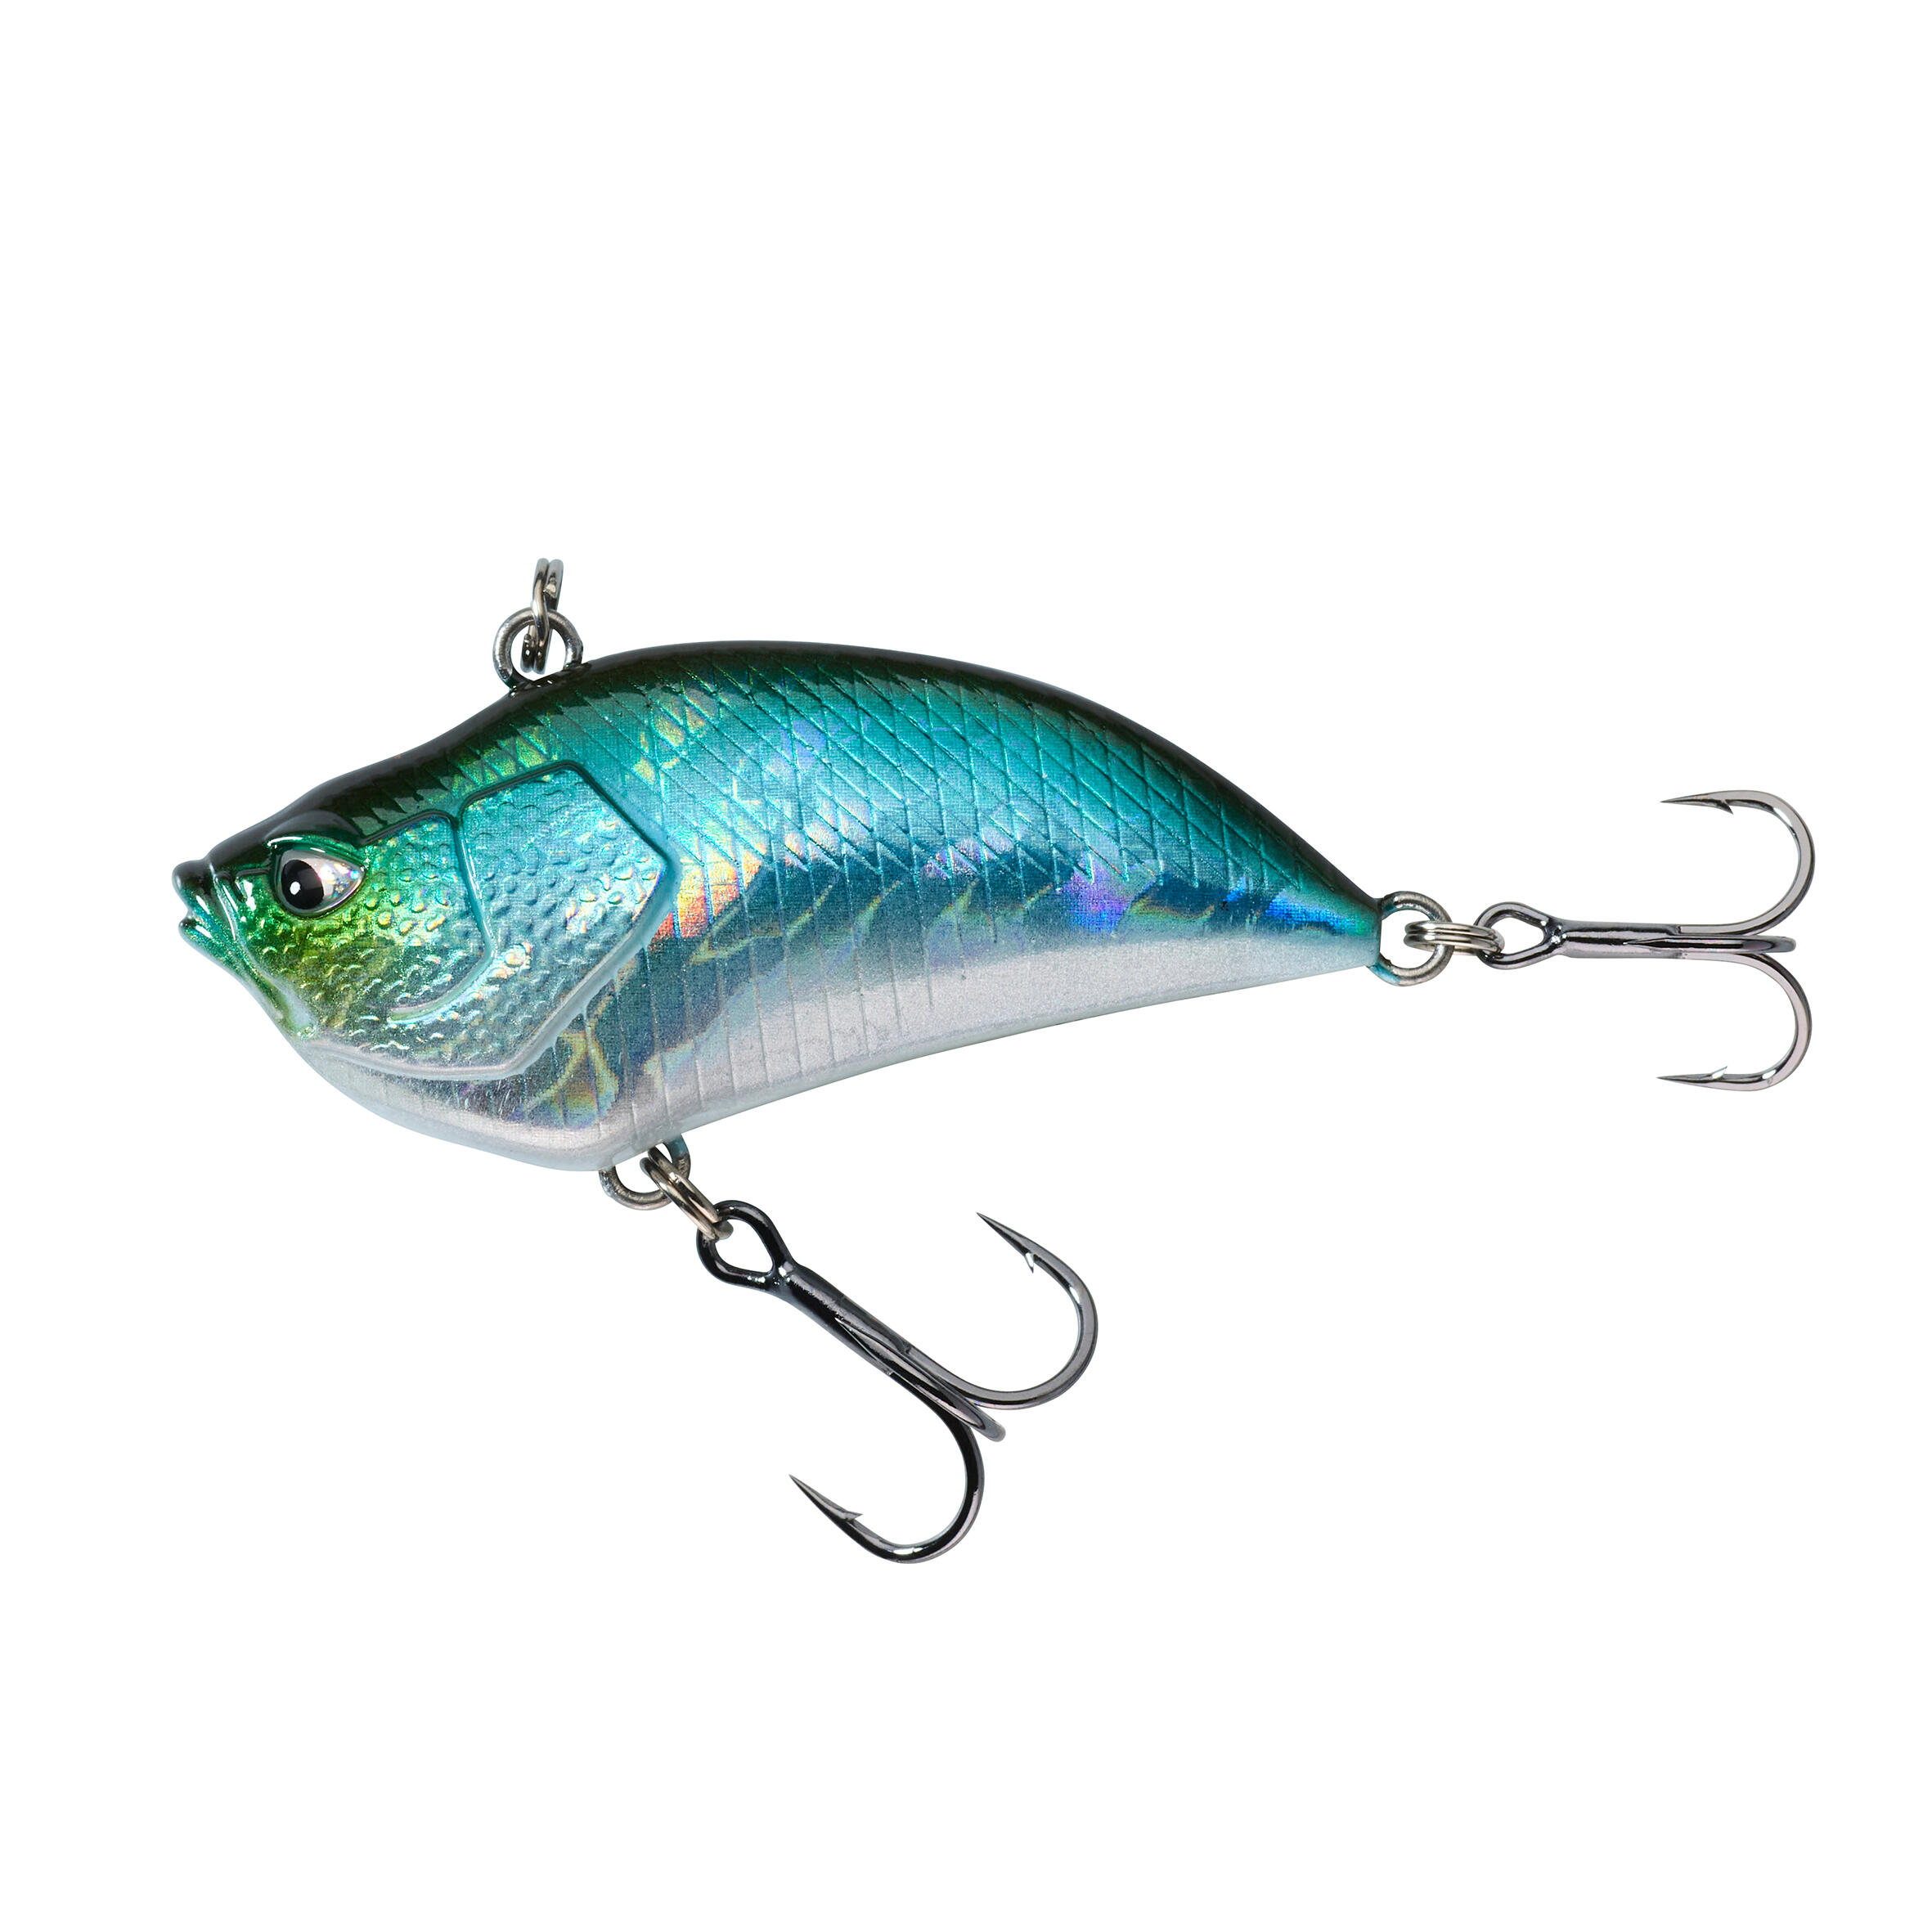 🎣💕 NEW DROP ALERT: Valen-Shad Fishing Lures! 💕🎣 🌟 LIMITED EDITION